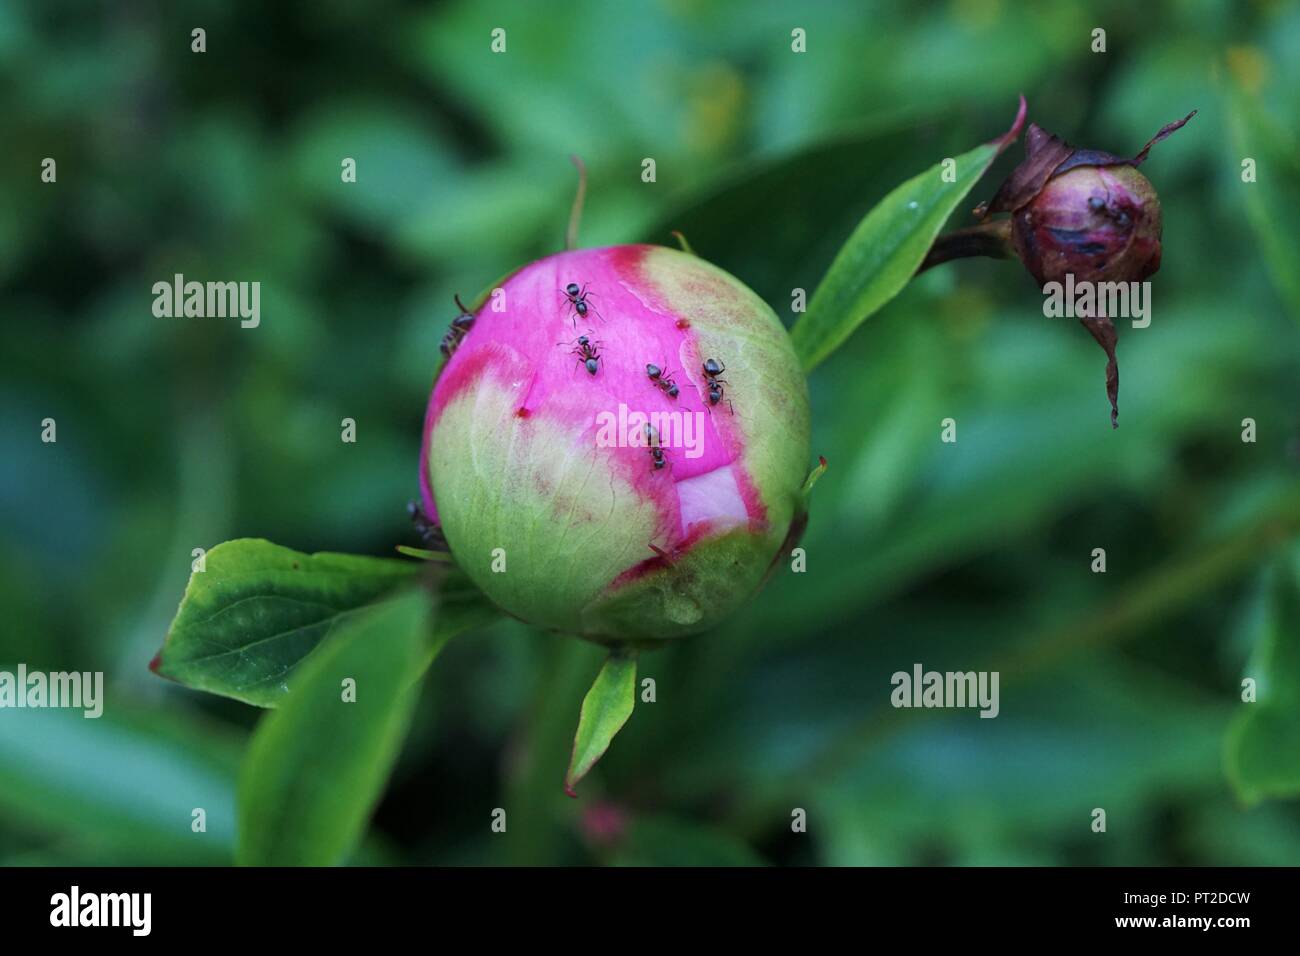 A pink flower in summer with worker ants exploring its petals. Stock Photo